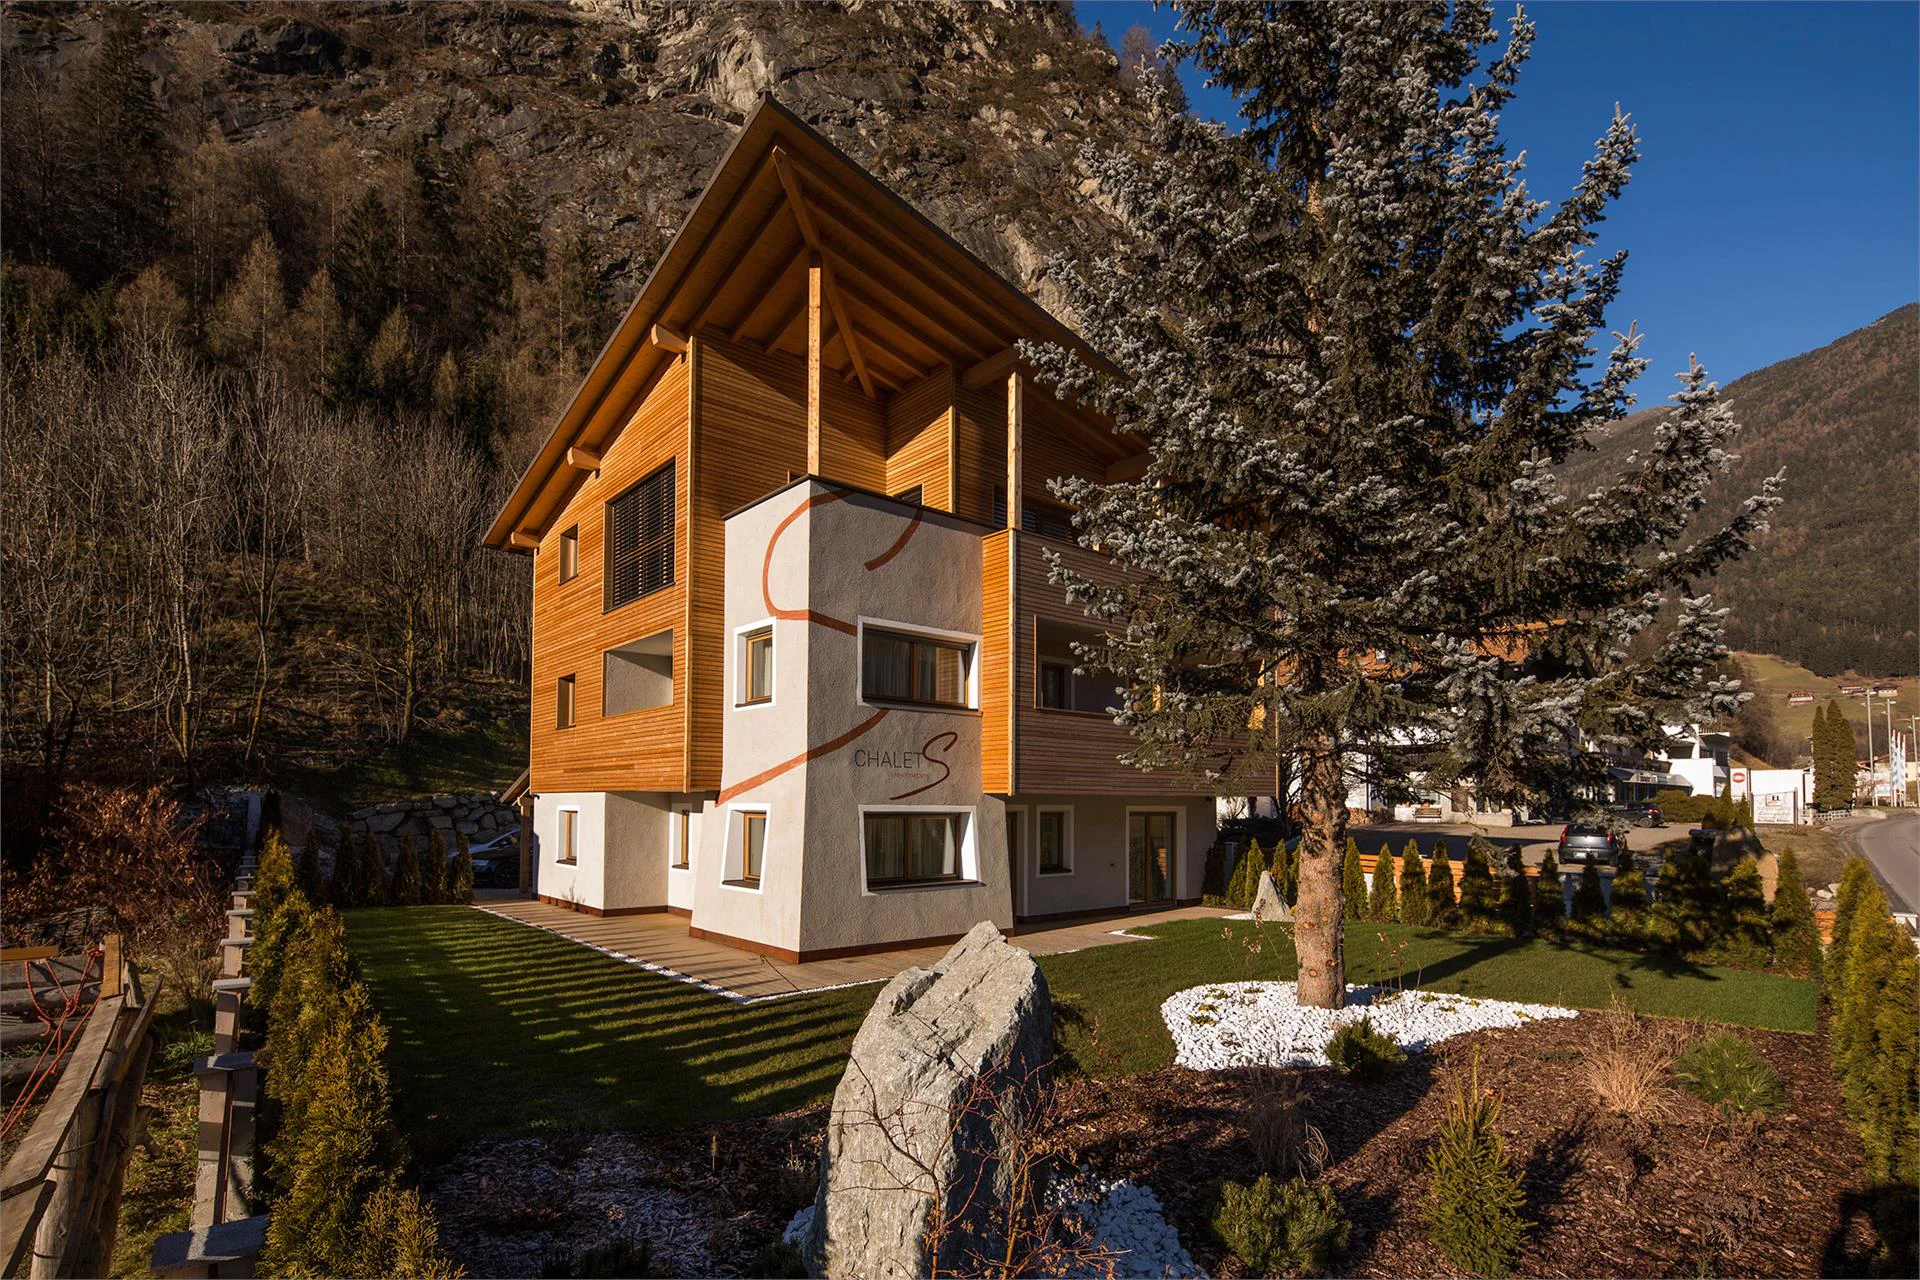 Chalet S Apartments Sand in Taufers/Campo Tures 16 suedtirol.info